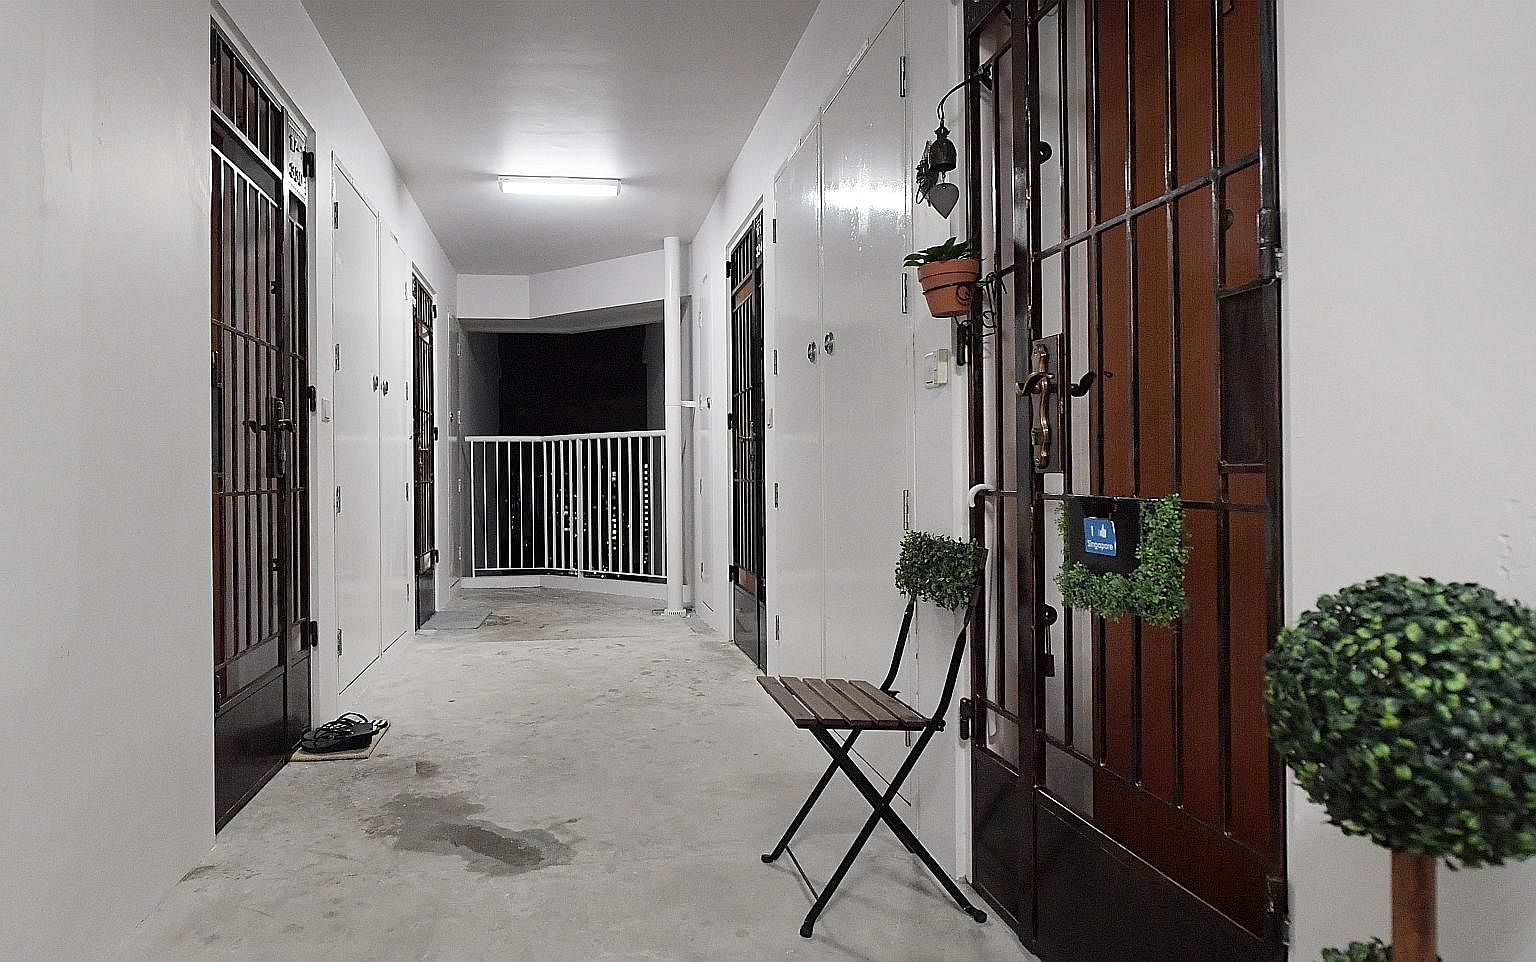 One of the two cases involved a housewife who lived in a unit (front, right) in Punggol. The other involved a couple from Bukit Panjang. In both cases, they were accused by their neighbours of creating a din.